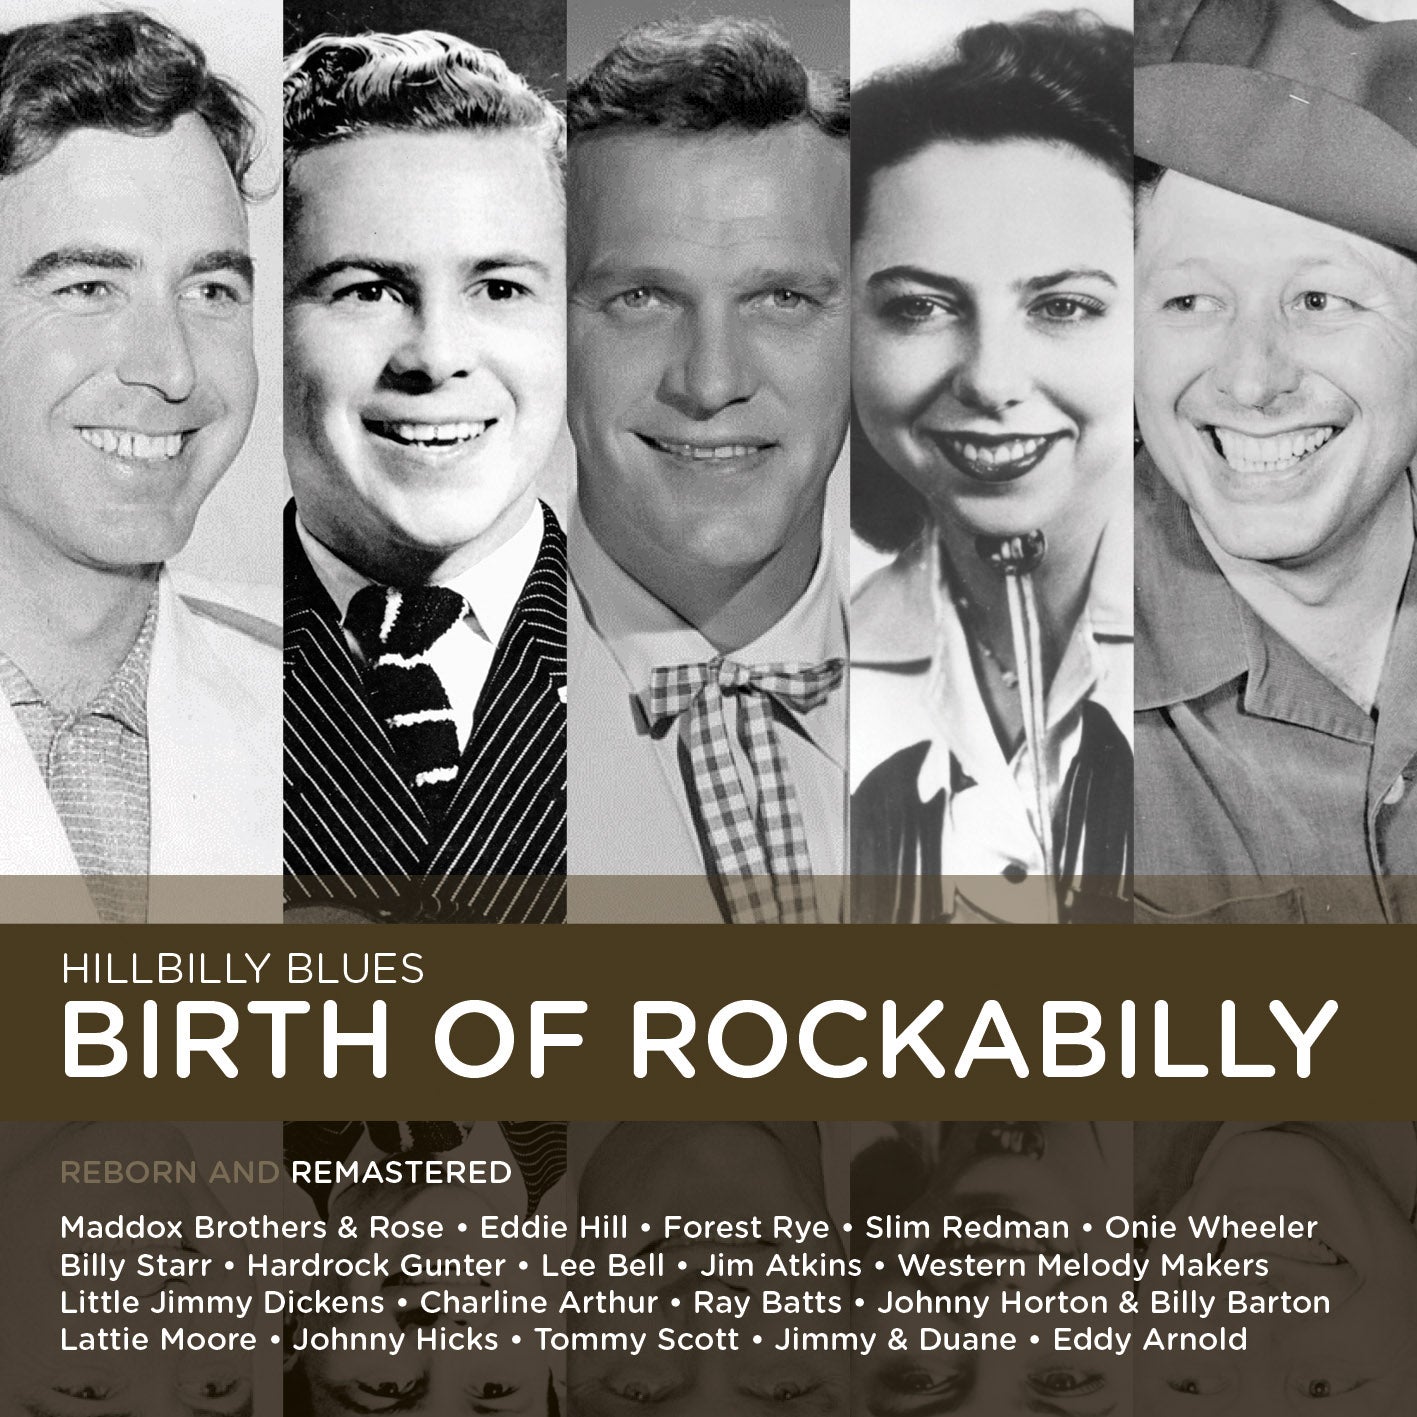 VARIOUS ARTISTS - HALL OF FAME:  HILLBILLY BLUES –  BIRTH OF ROCKABILLY